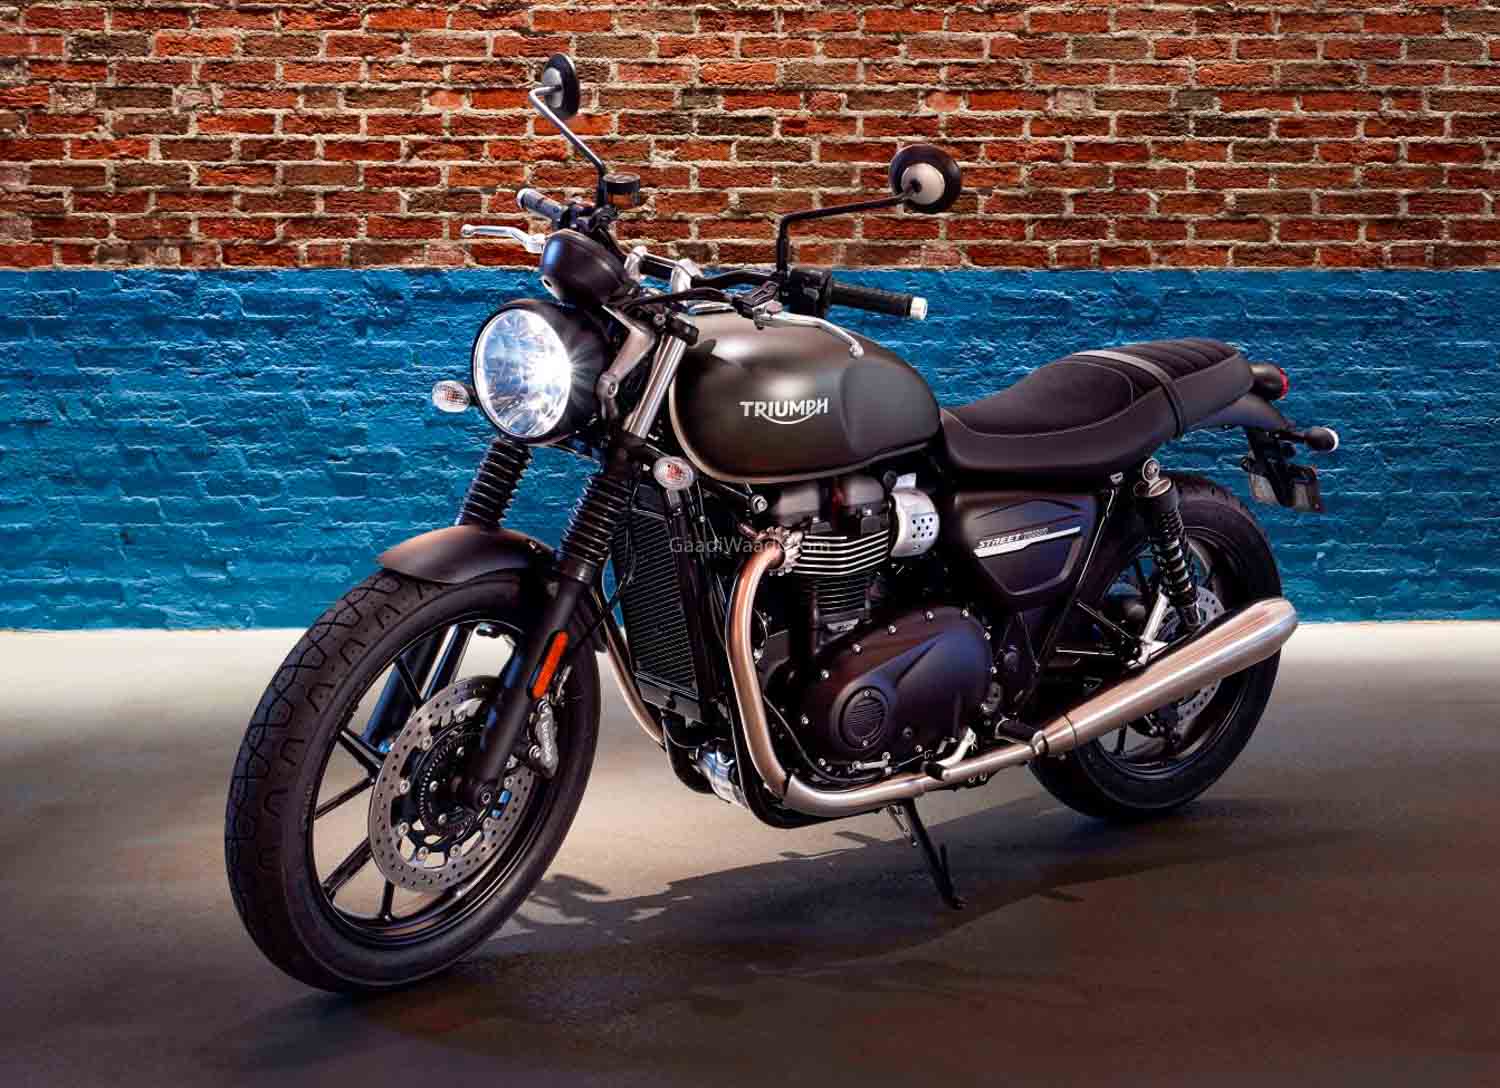 BS6 Triumph Street Twin Launched In India, Priced From Rs. 7.45 Lakh